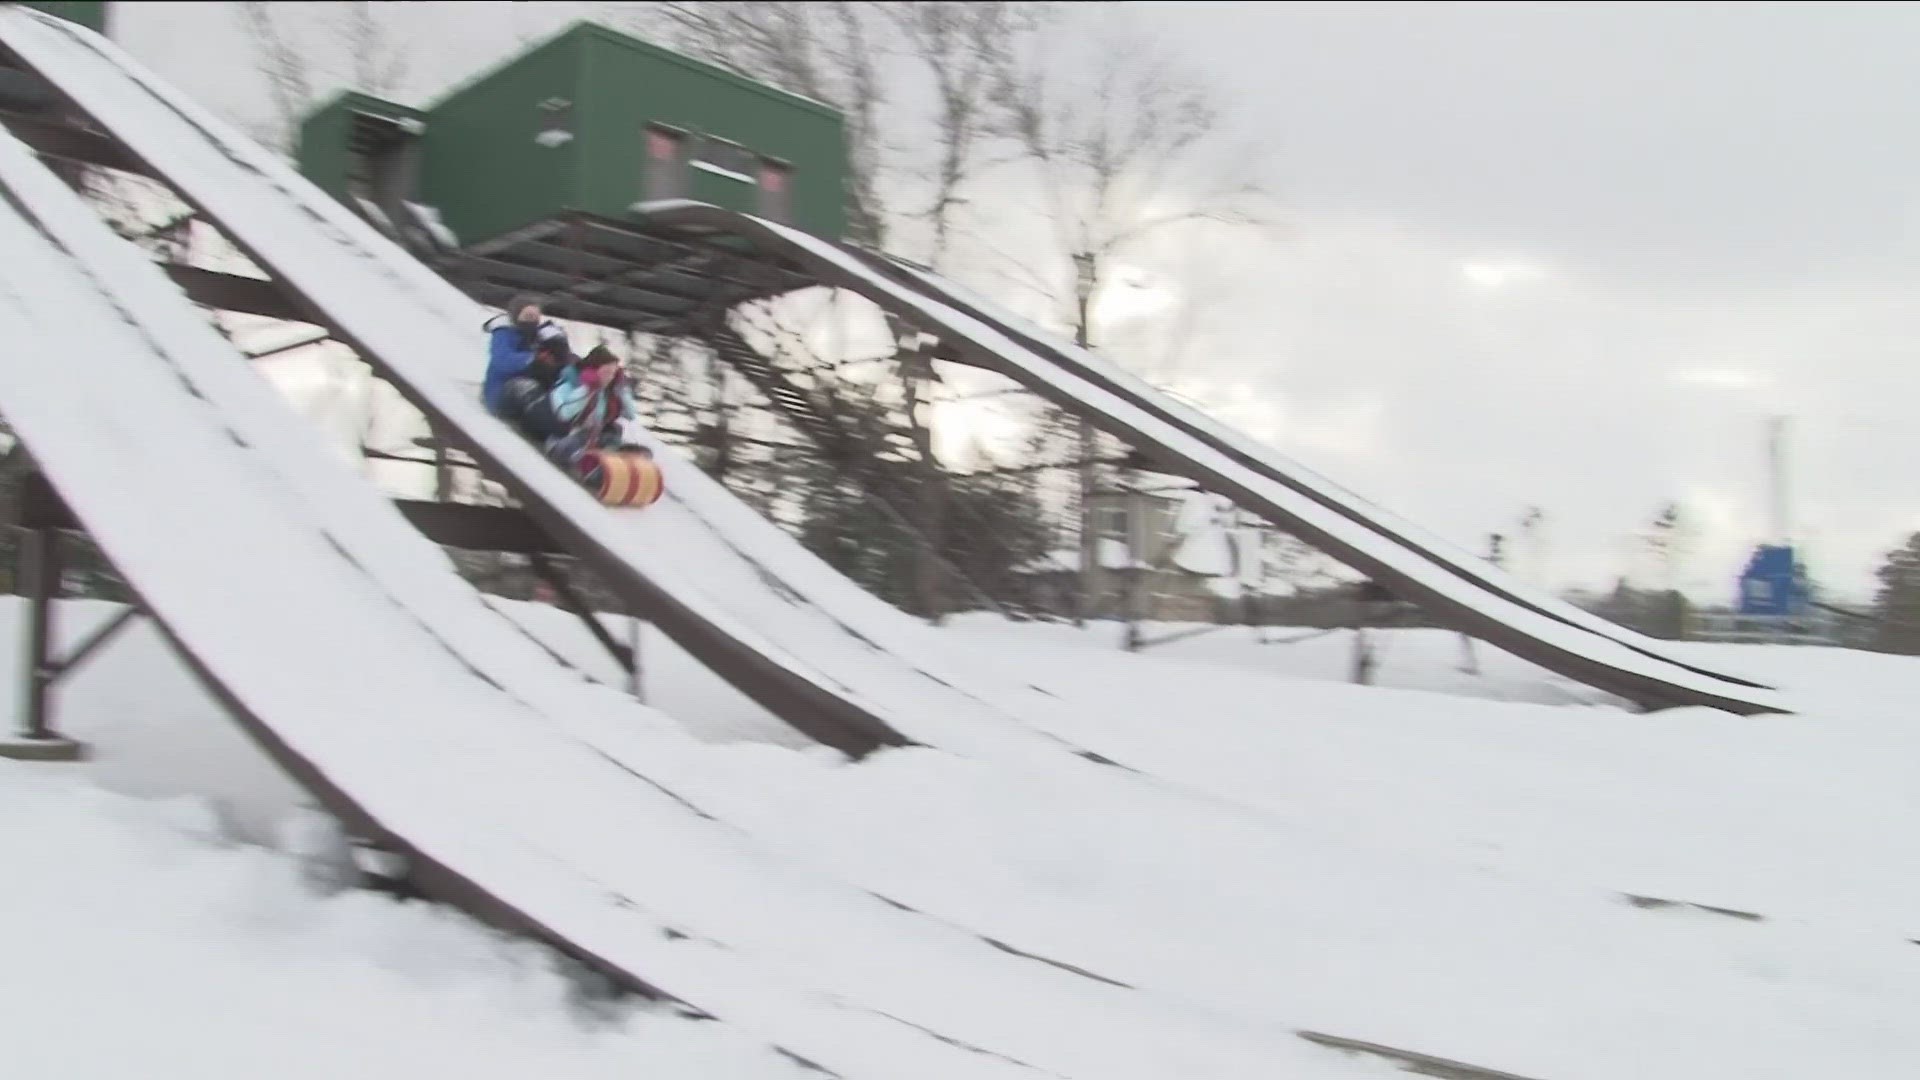 The Erie County Parks Department says to bring your own toboggan or you can rent one from the concession stand.